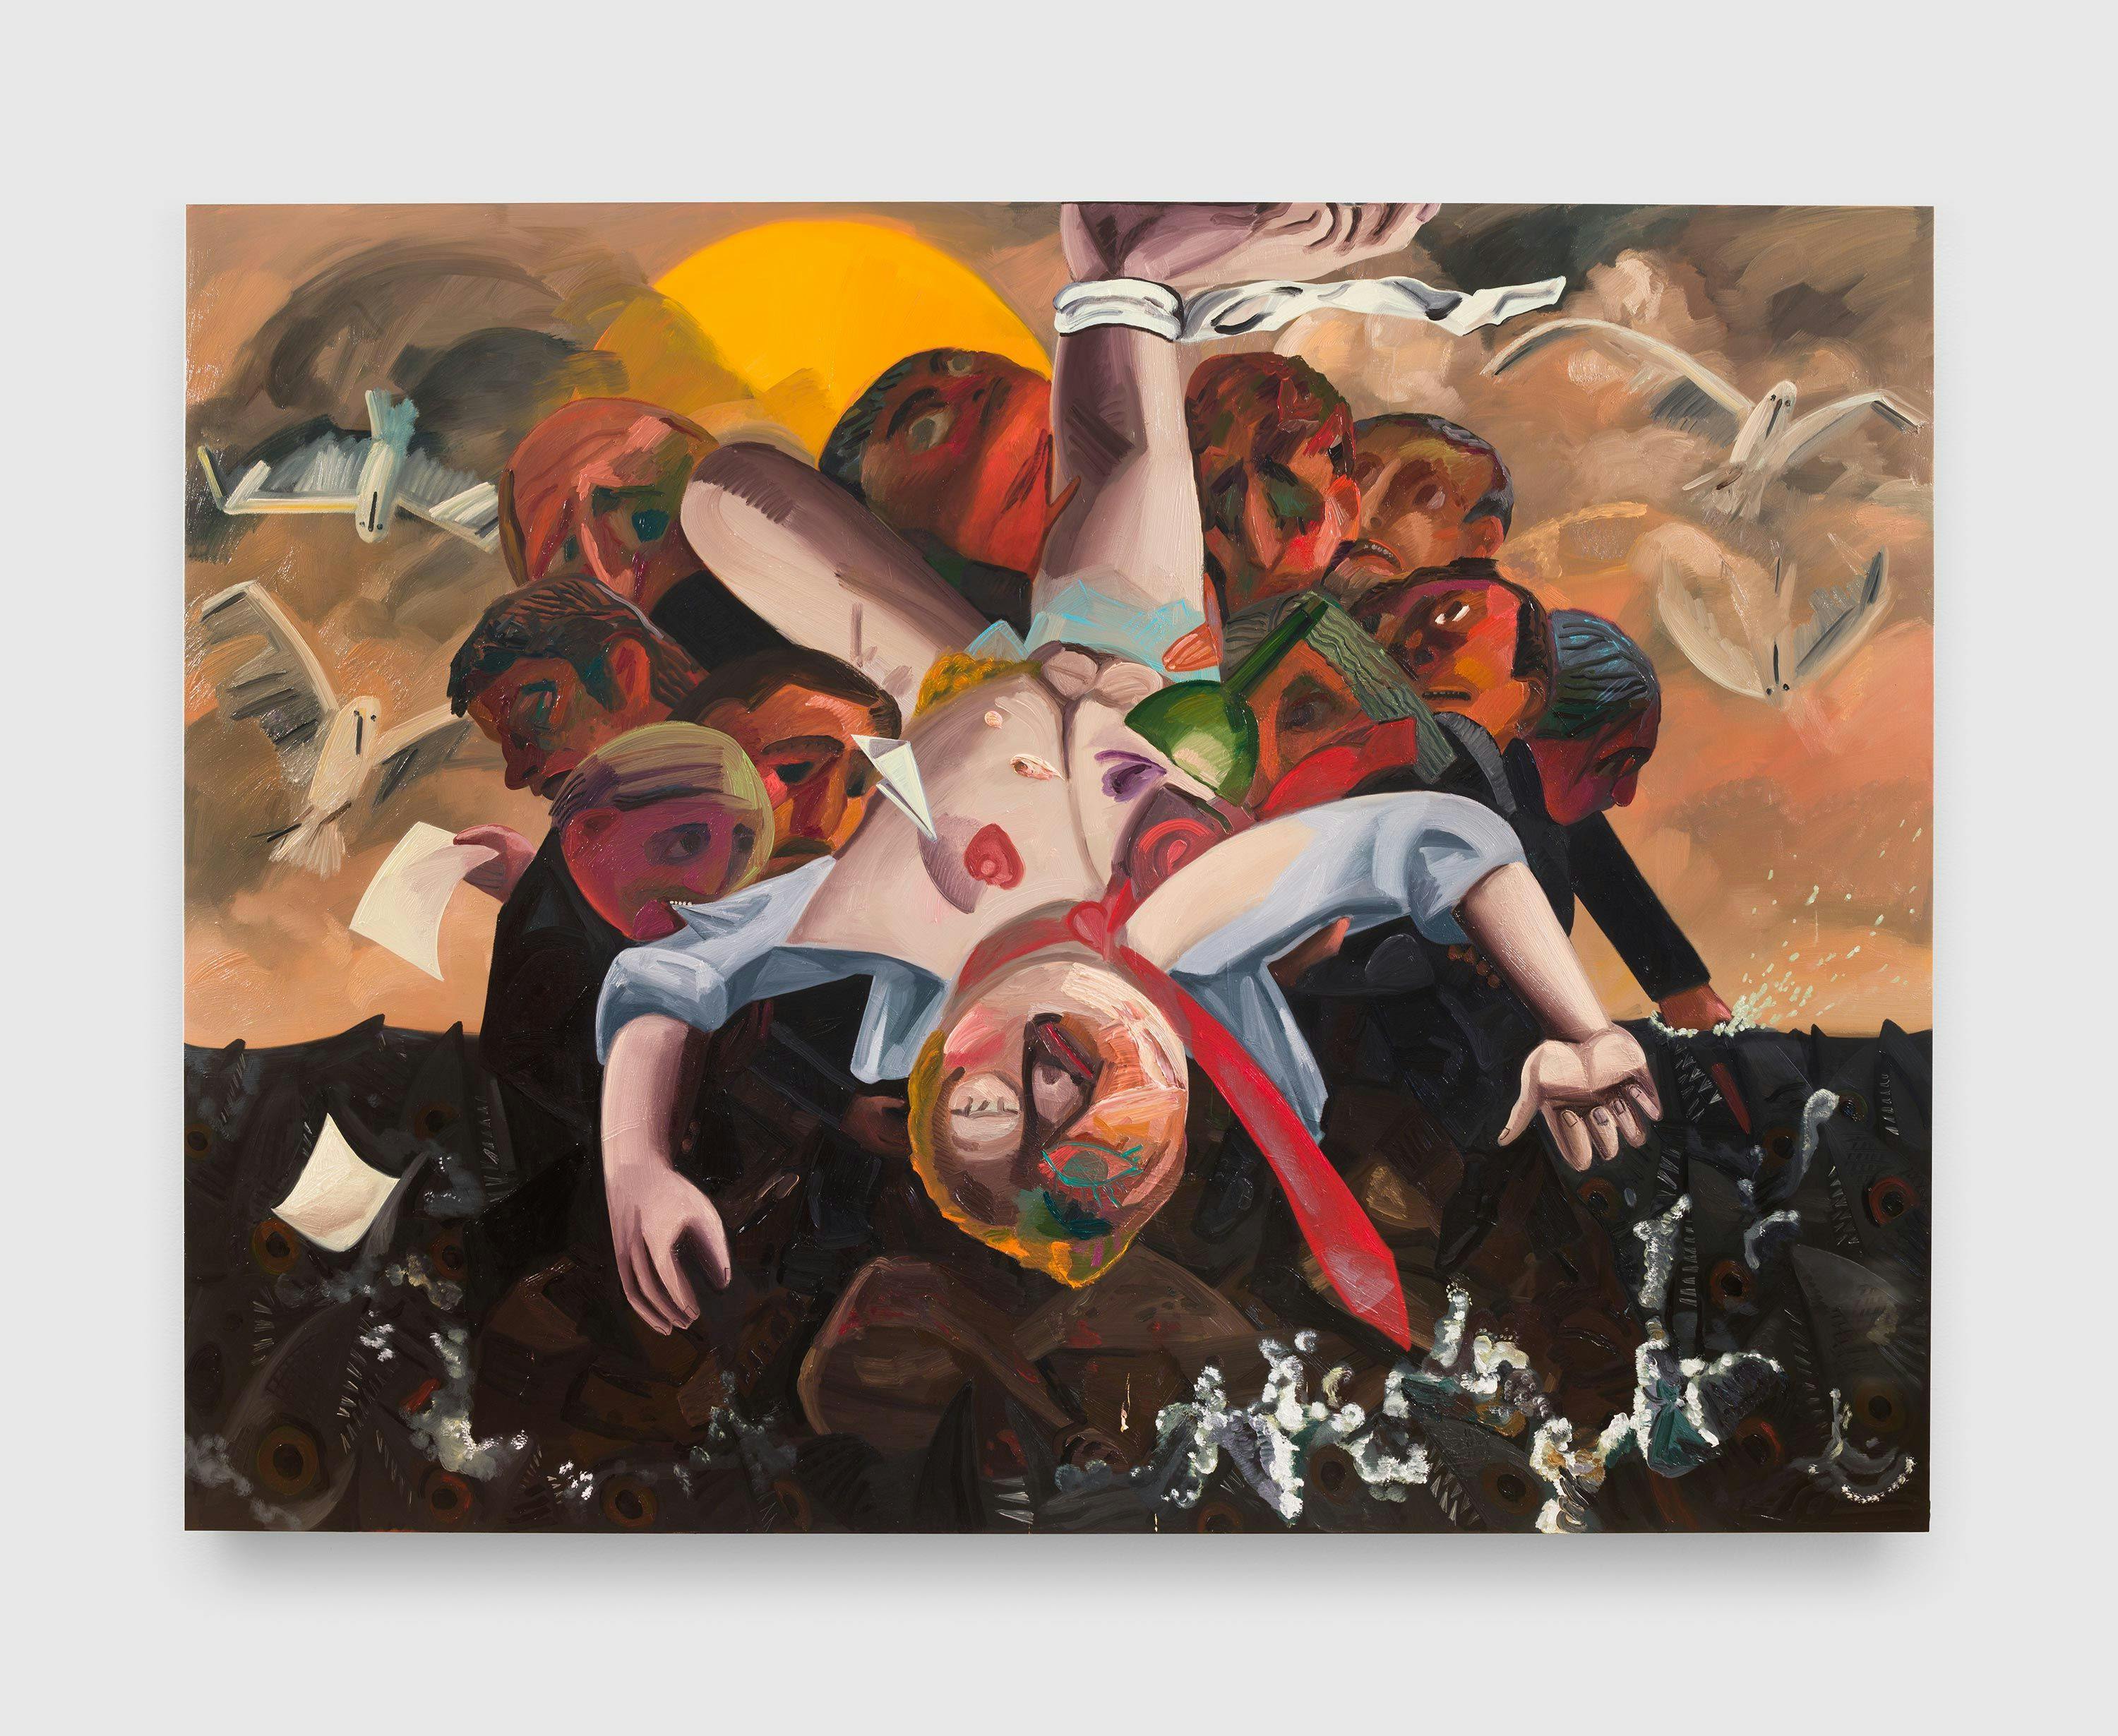 A painting by Dana Schutz, titled Deposition, dated 2017.